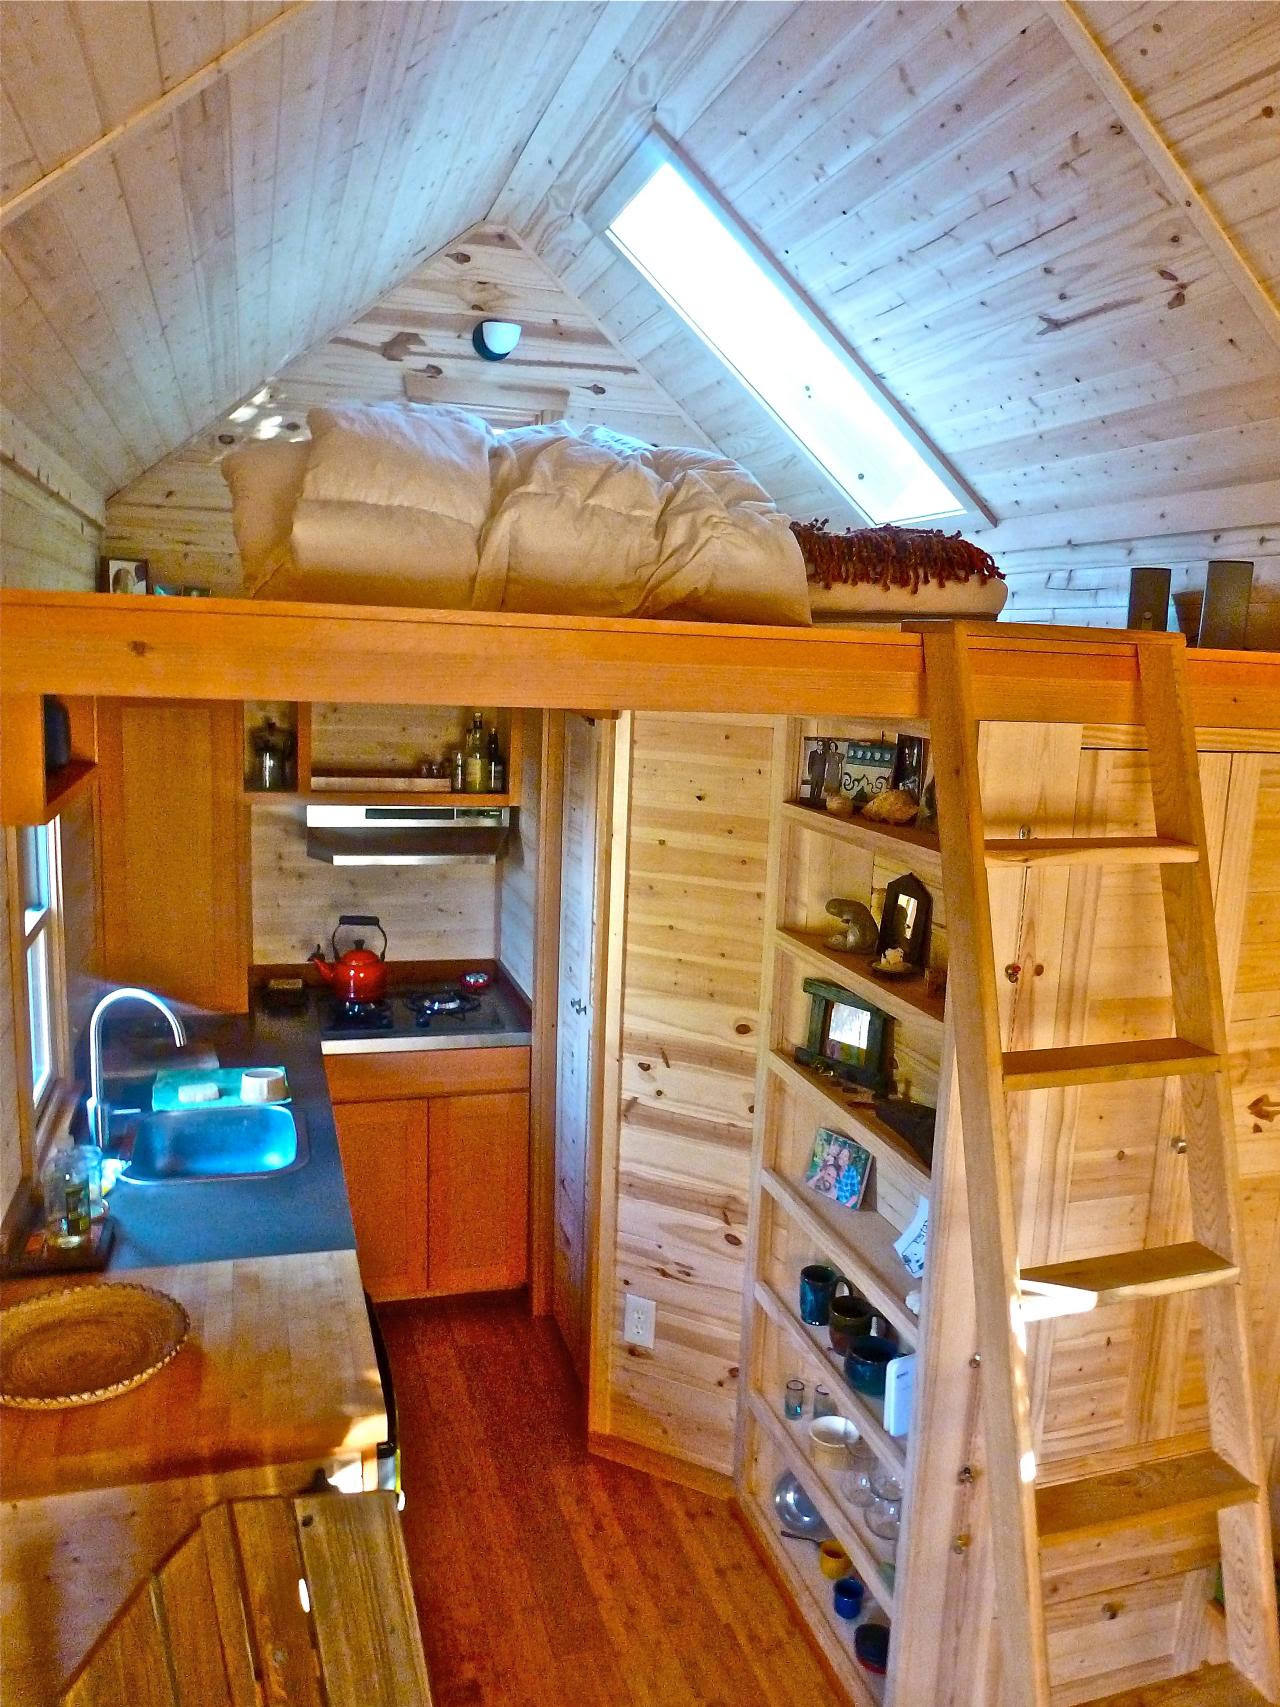 http://www.hgtv.com/remodel/interior-remodel/10-extreme-tiny-homes-pictures